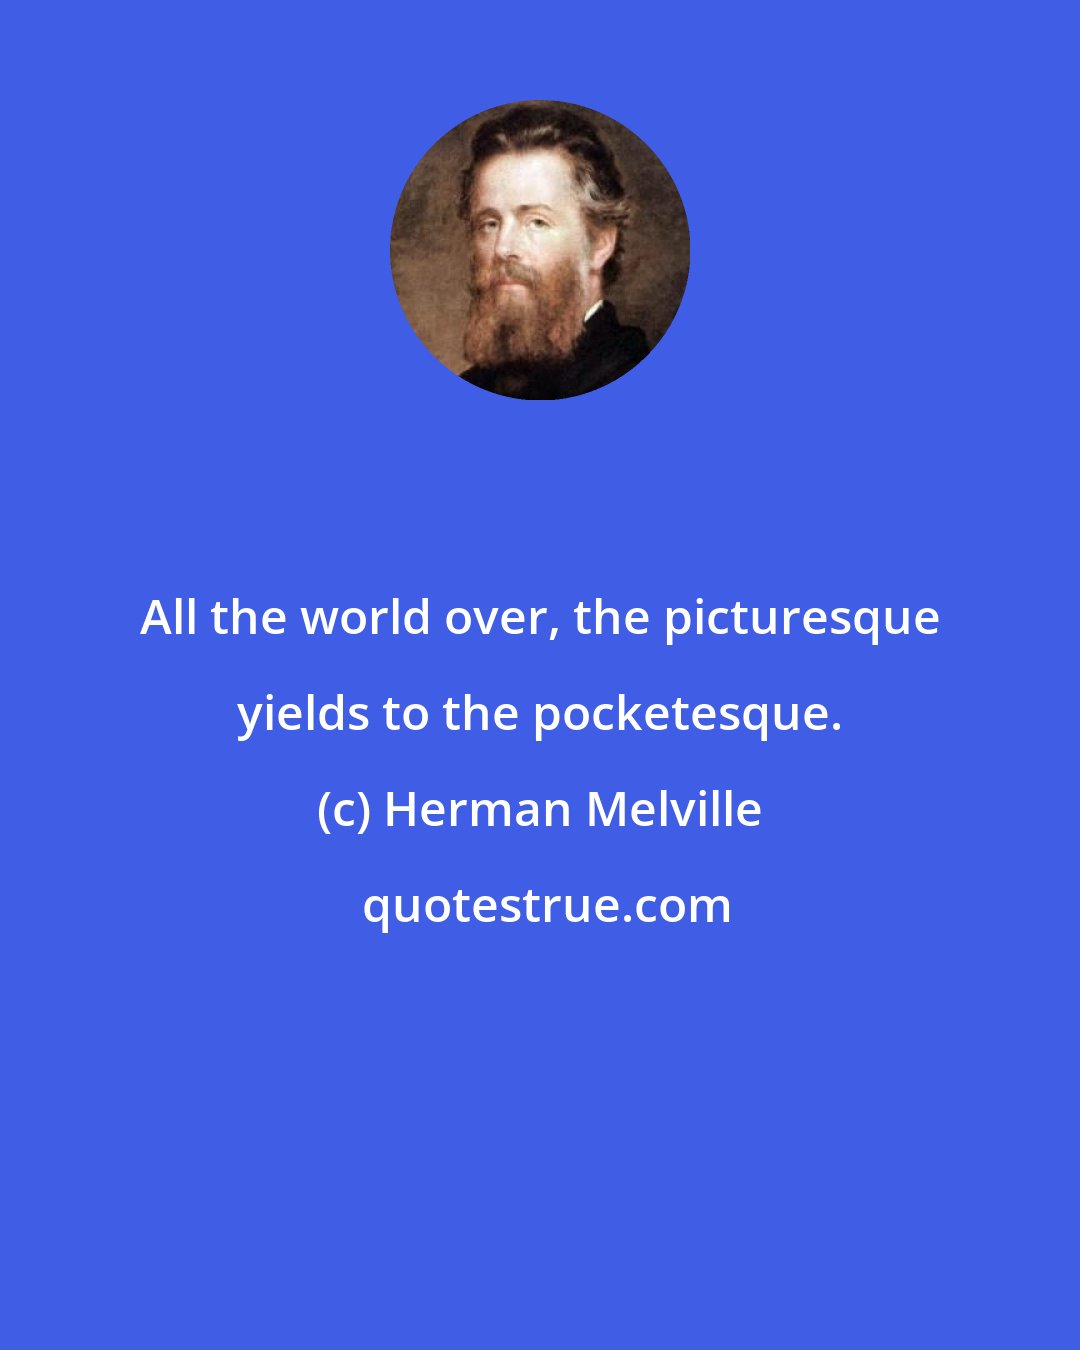 Herman Melville: All the world over, the picturesque yields to the pocketesque.